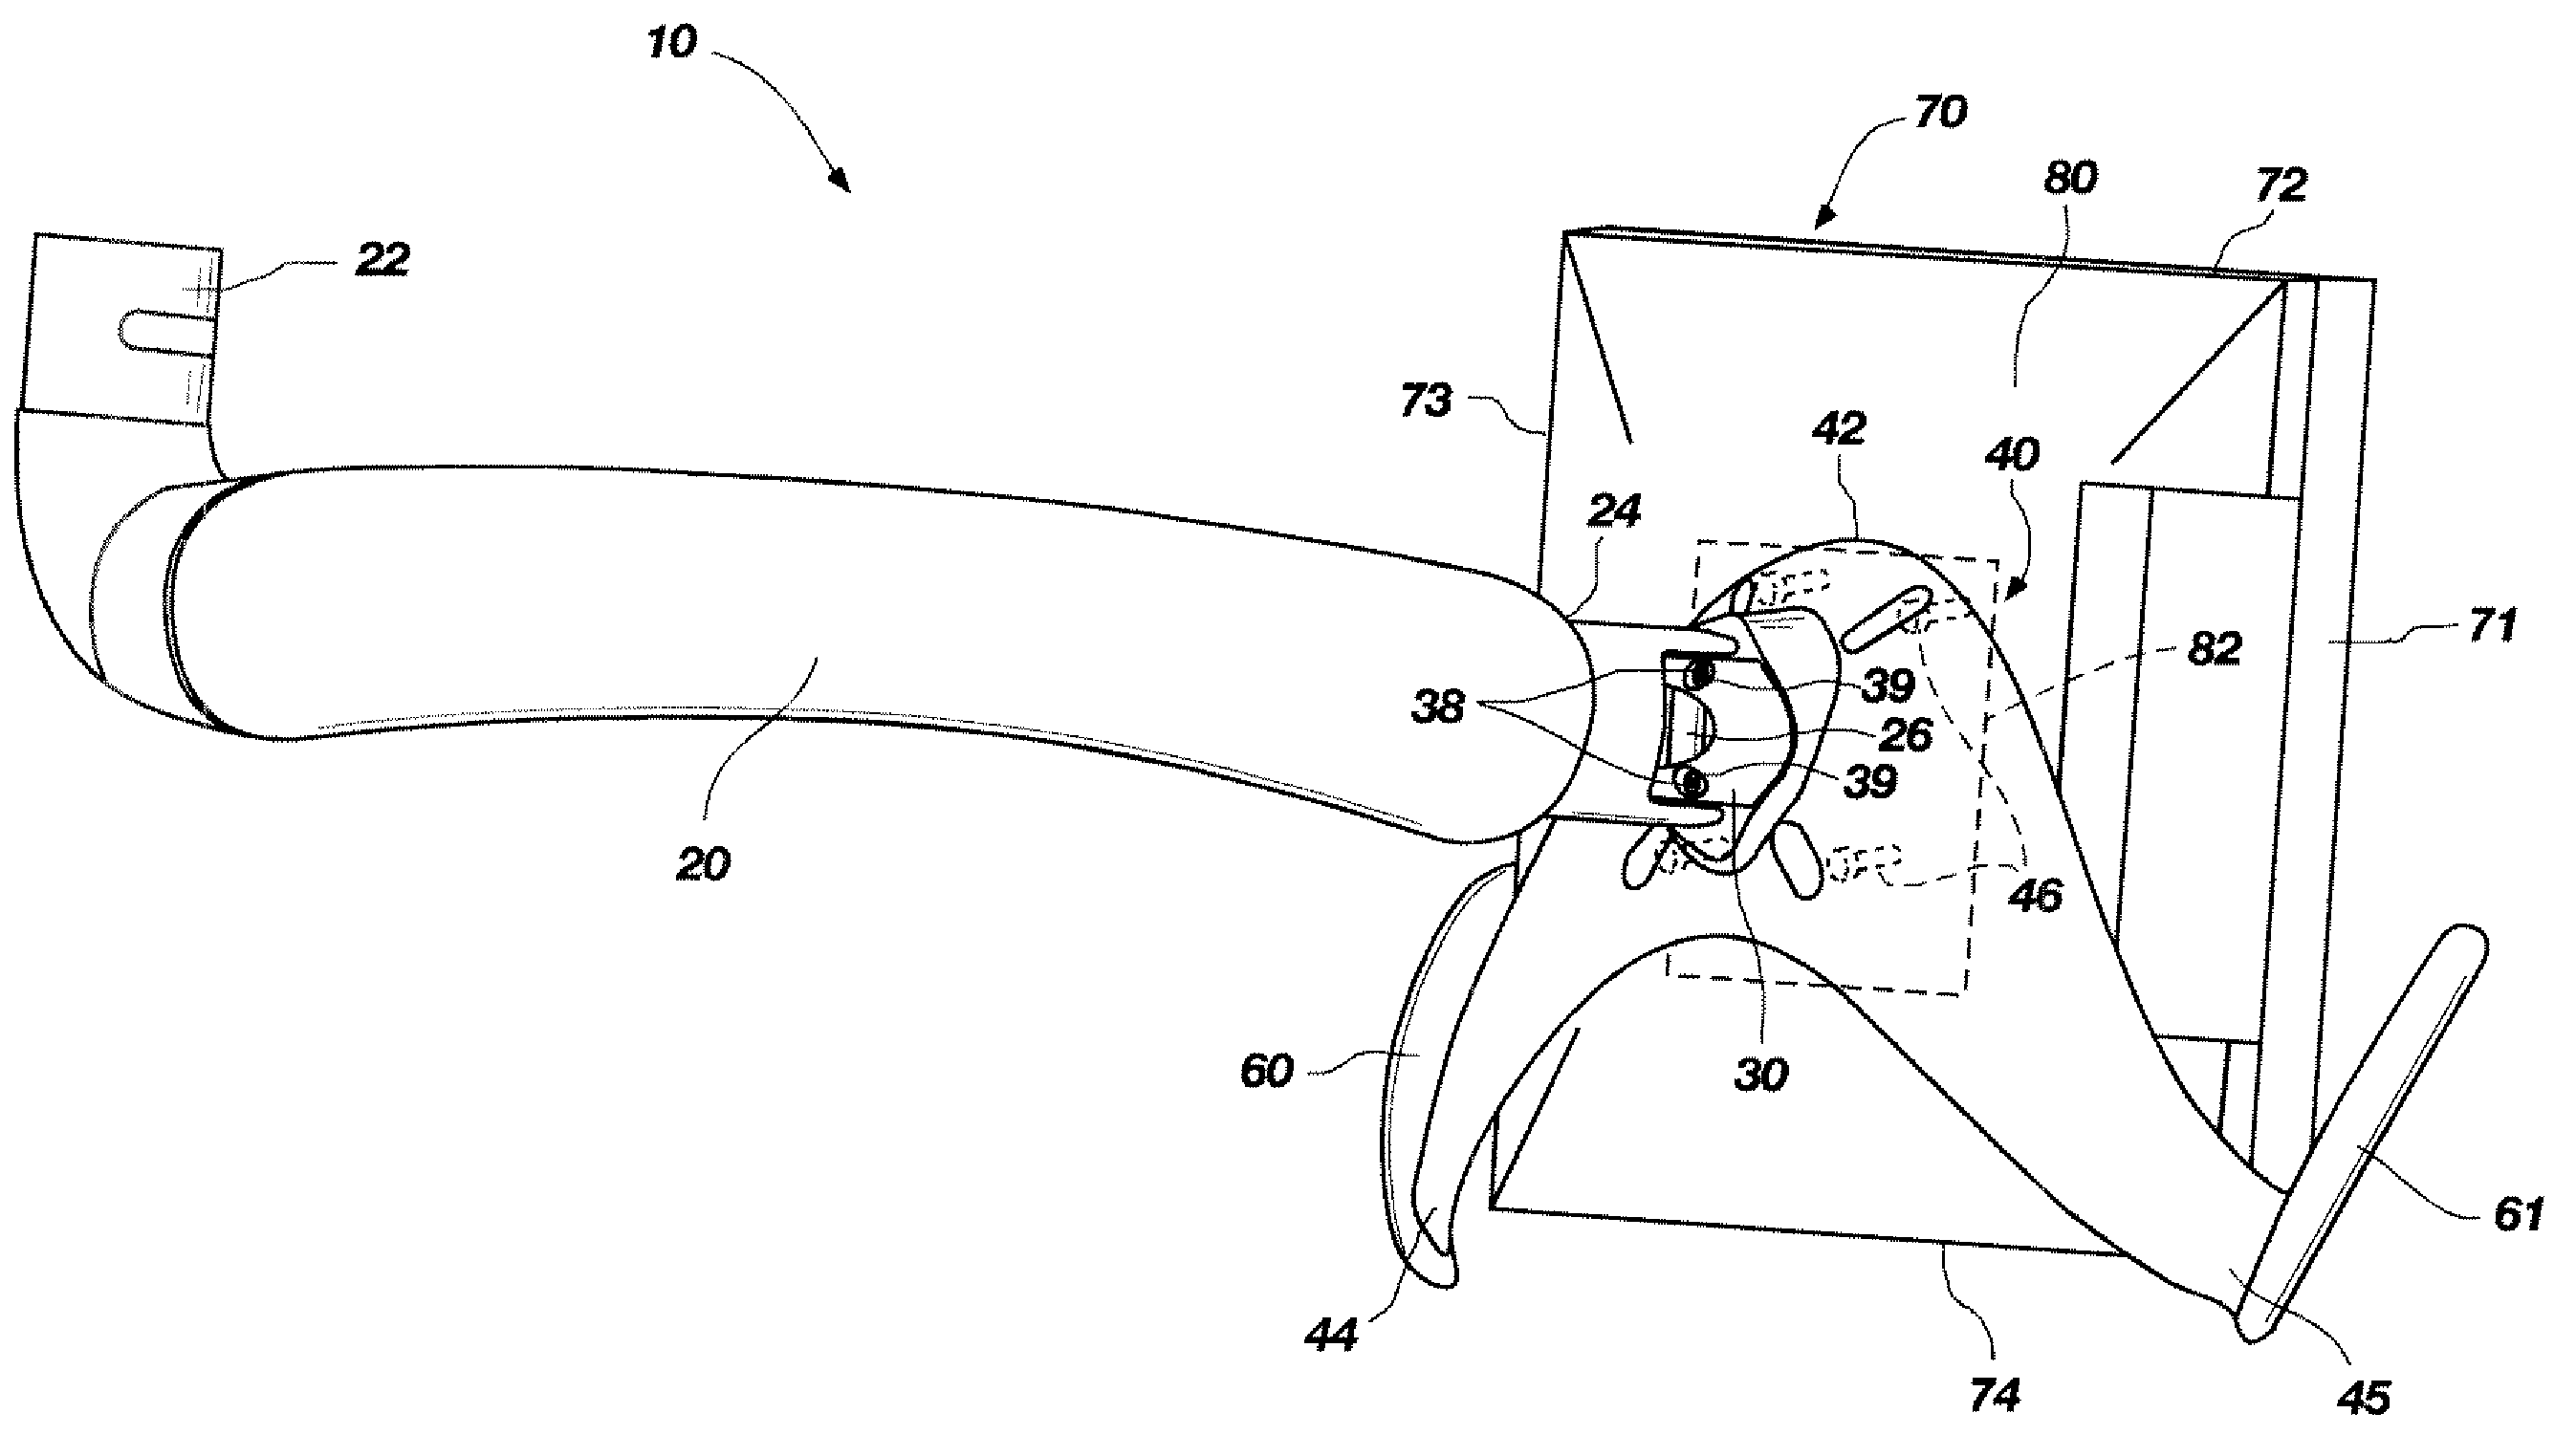 Support for assembly with flat panel video monitors, coupler for attachment of the support to an extension arm, and assembly methods